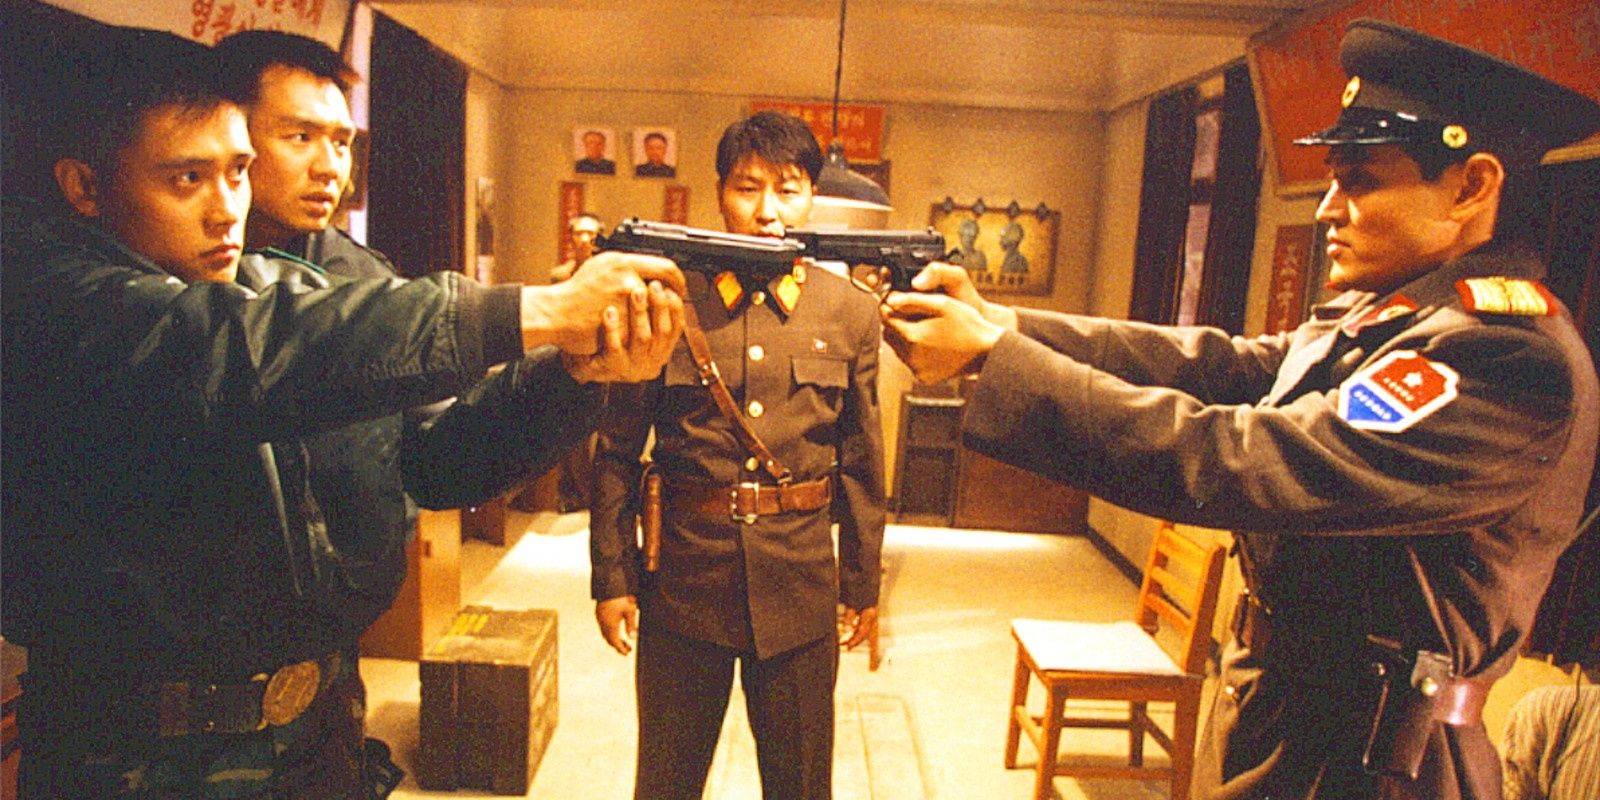 Opposing sides pointing guns at each other in Joint Security Area (2000)